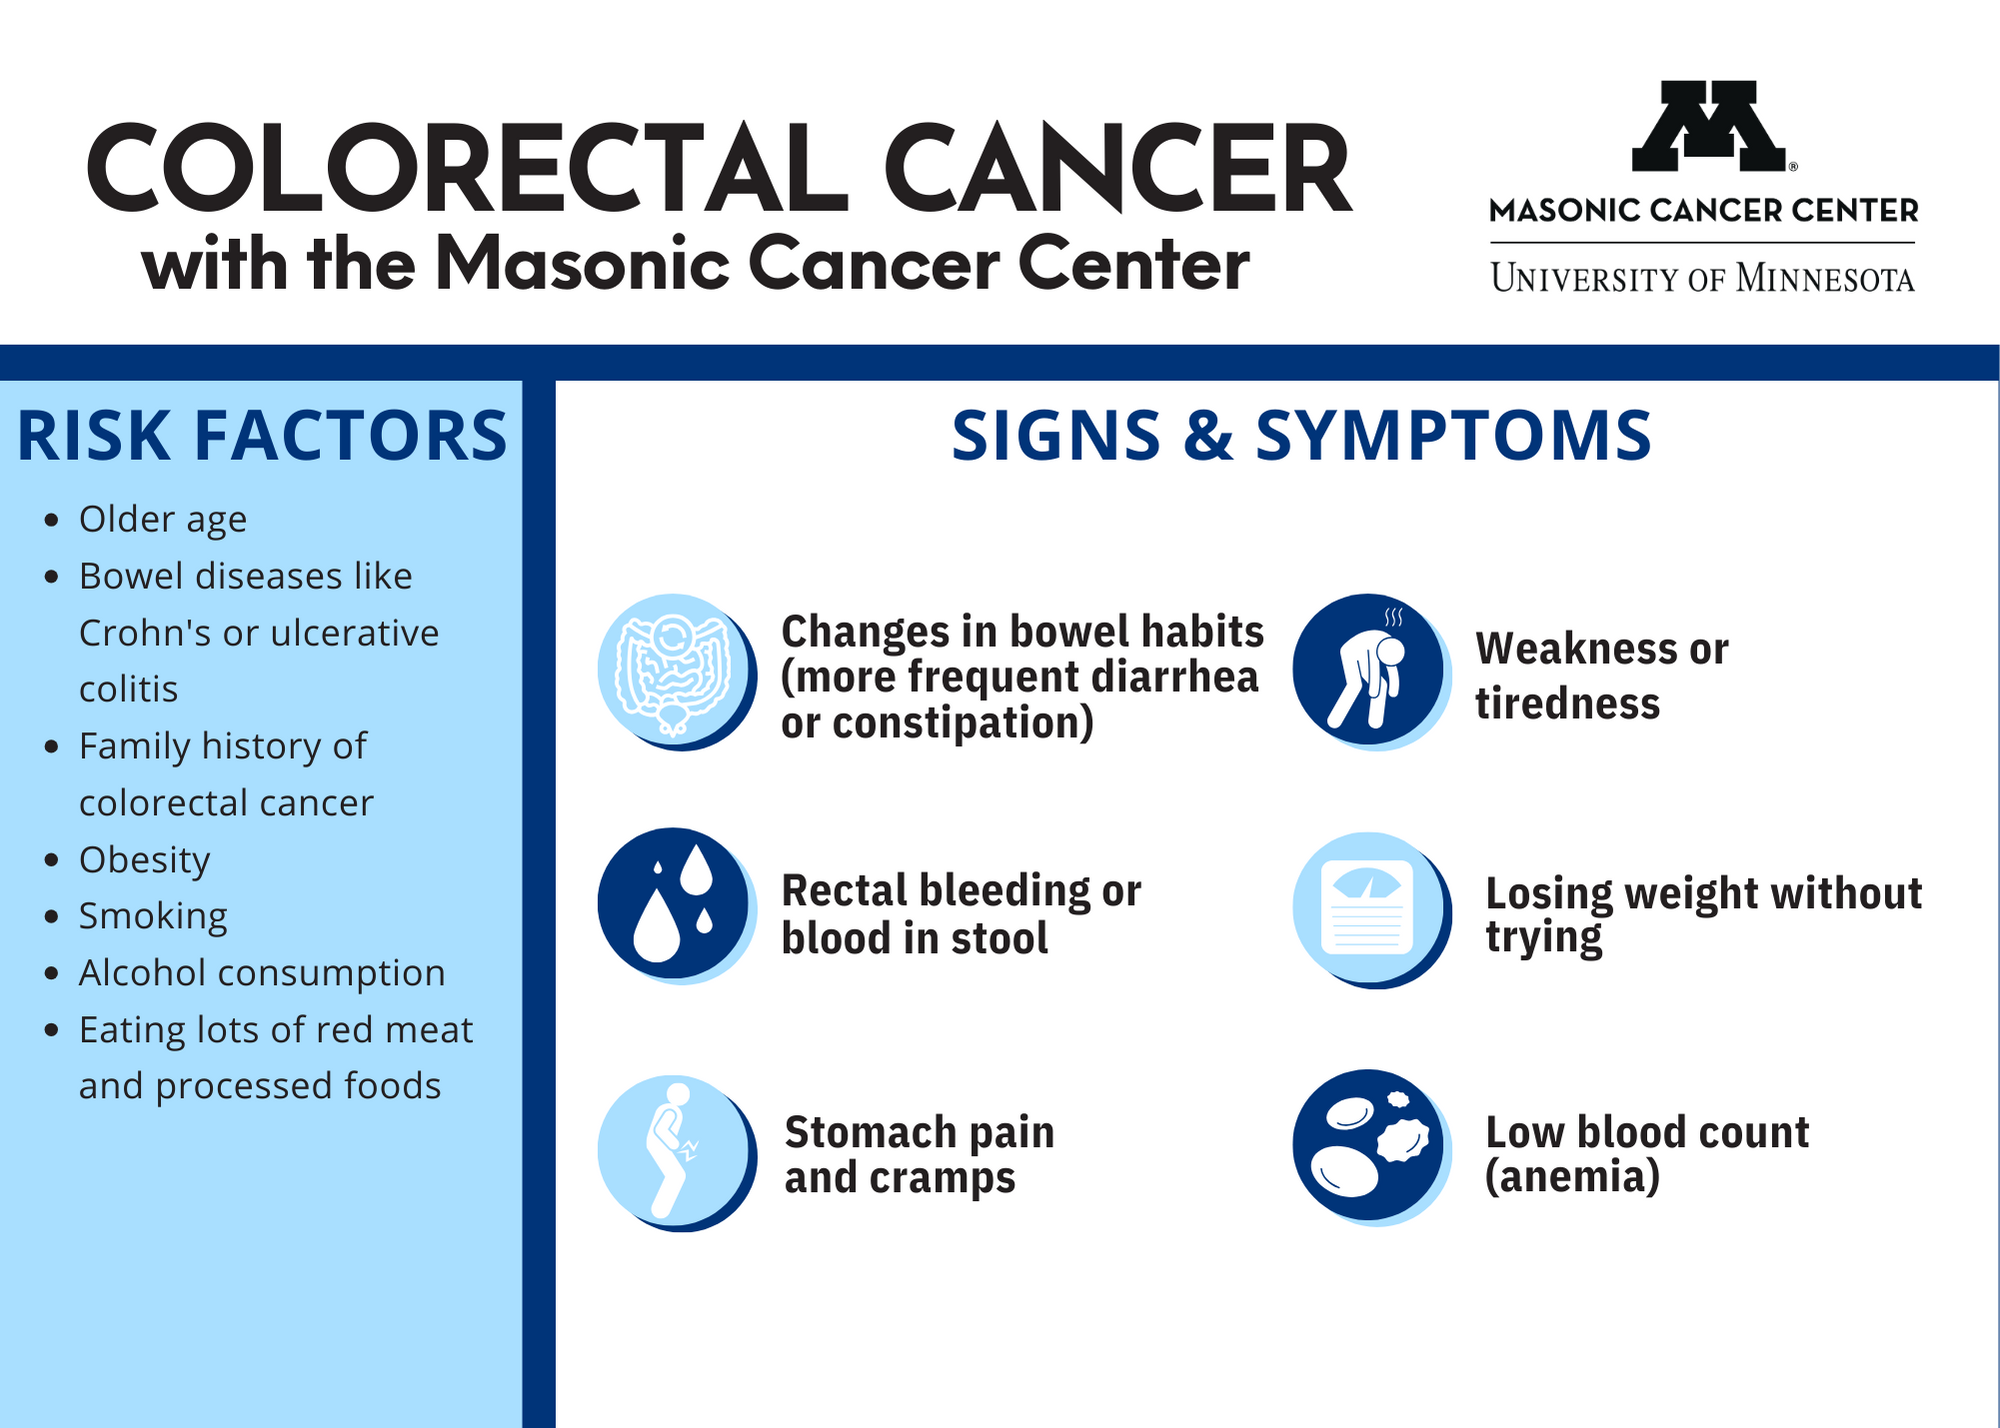 Colorectal Cancer Infographic